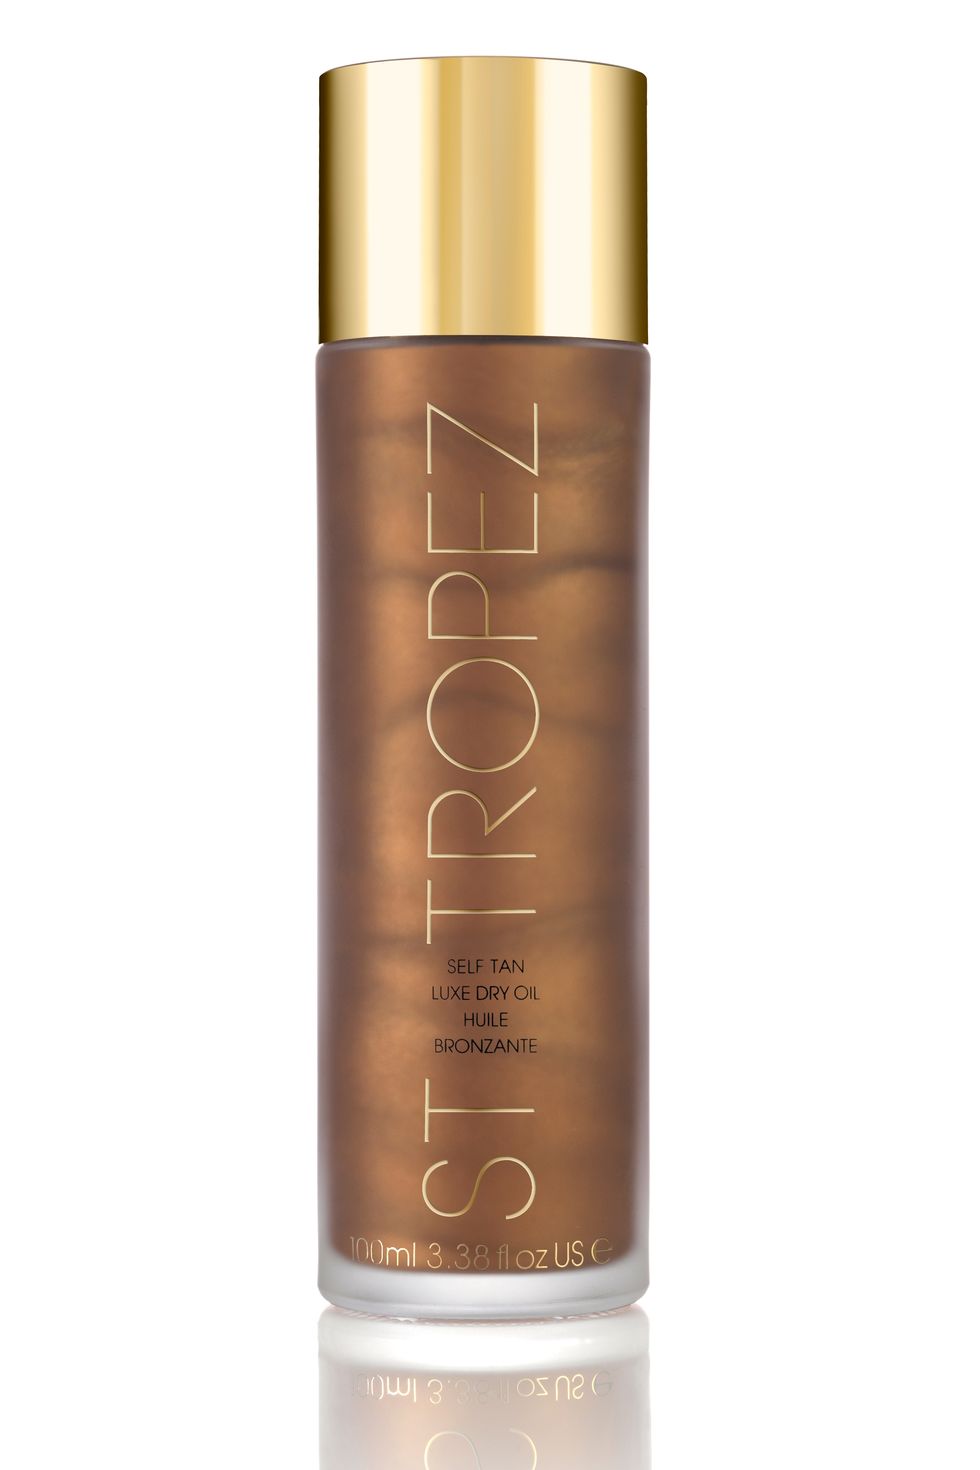 <p>Before, when we saw 'tanning' and 'oil' together, we'd think sizzling in the sun (yikes); now we think super sumptuous bronzing with a generous hydration hit. Smooth this dry oil on with a mitt, like you would your usual cream, for a luxe, indulgent way to glow with a sweet, citrusy scent. It's a healthy, luminous, gentle tint that takes the edge off of pasty limbs, all while feeling like a spathroom treat with its luscious formula.</p>
<p><a href="http://www.st-tropez.com/en-gb/luxe-dry-oil/%20" target="_blank">St Tropez Self Tan Luxe Dry Oil, £25</a></p>
<p><a href="http://www.cosmopolitan.co.uk/beauty-hair/beauty-tips/fake-tan-tricks-tips" target="_blank">12 TOP FAKE TAN TRICKS</a></p>
<p><a href="http://www.cosmopolitan.co.uk/beauty-hair/beauty-tips/tanning-tips-for-brides-destination-wedding" target="_blank">TANNING TIPS FOR BRIDES</a></p>
<p><a href="http://www.cosmopolitan.co.uk/beauty-hair/beauty-tips/how-to-get-golden-glow-skin" target="_blank">6 STEPS TO GORGEOUS GLOWING SKIN</a></p>